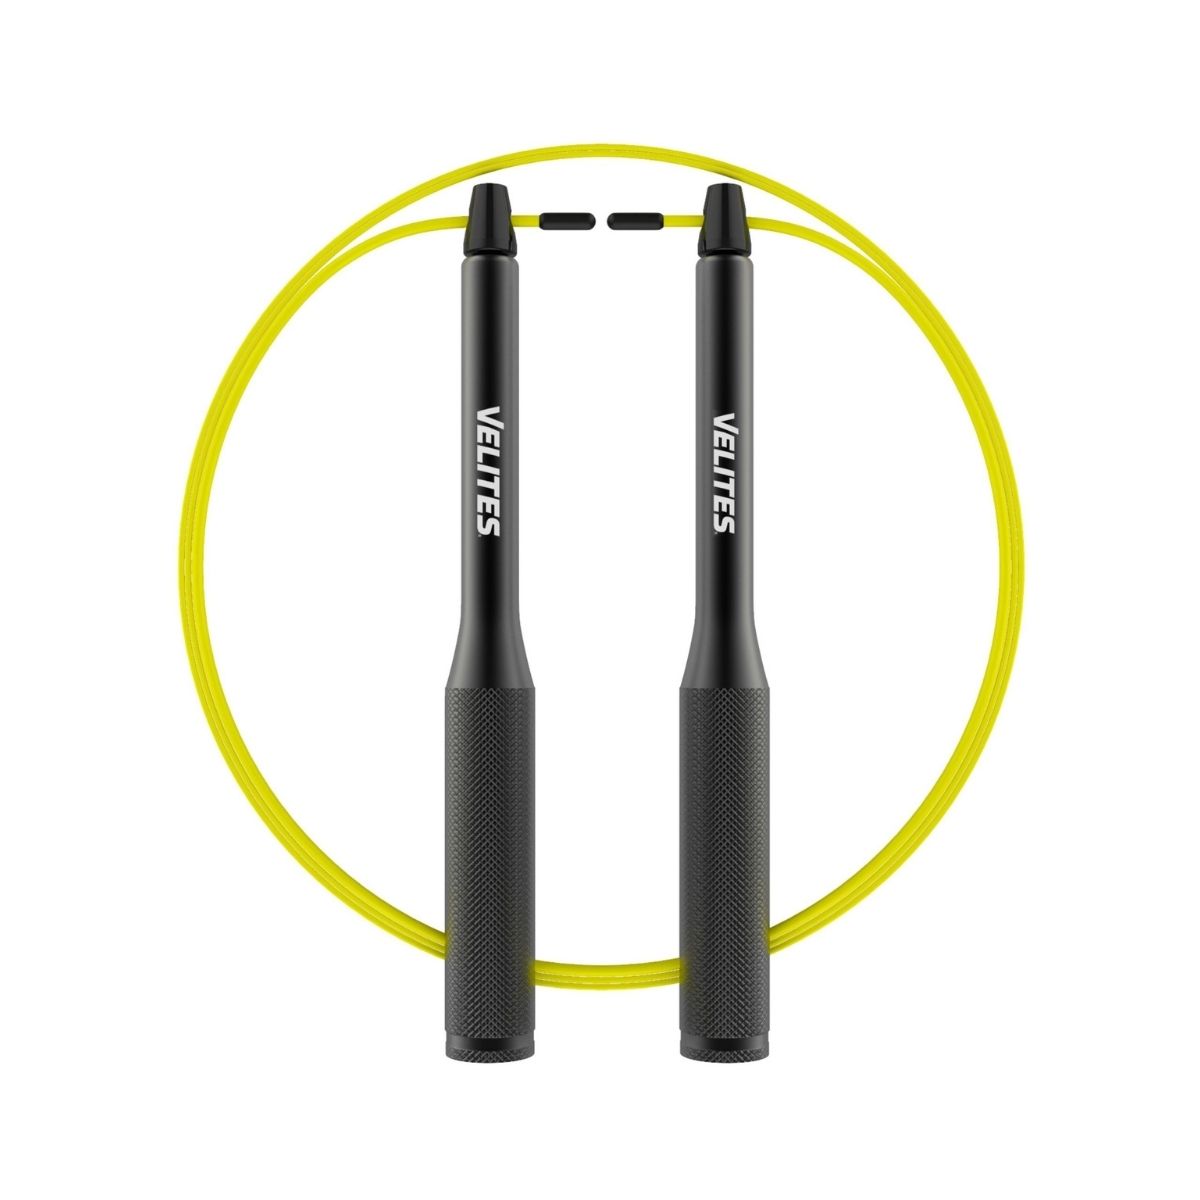 Fire 2.0 Competition Jump Rope | Velites - Wake Concept Store  